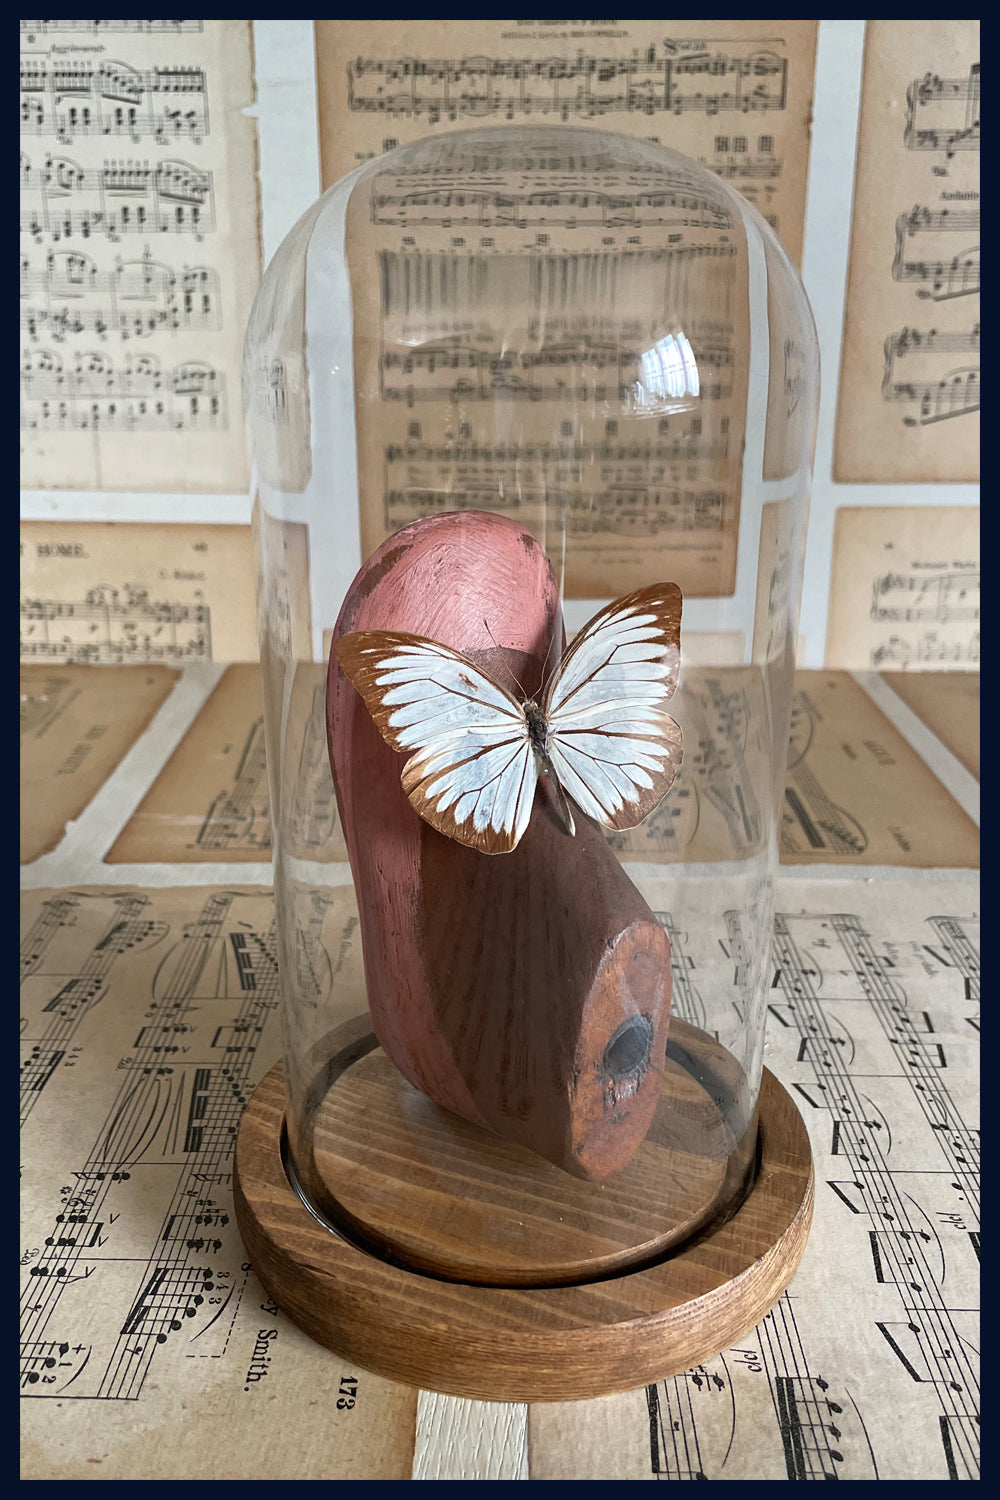 Enigma Variations Collection: Vintage Wooden Shoe Last with Old Butterfly in a Glass Display Dome